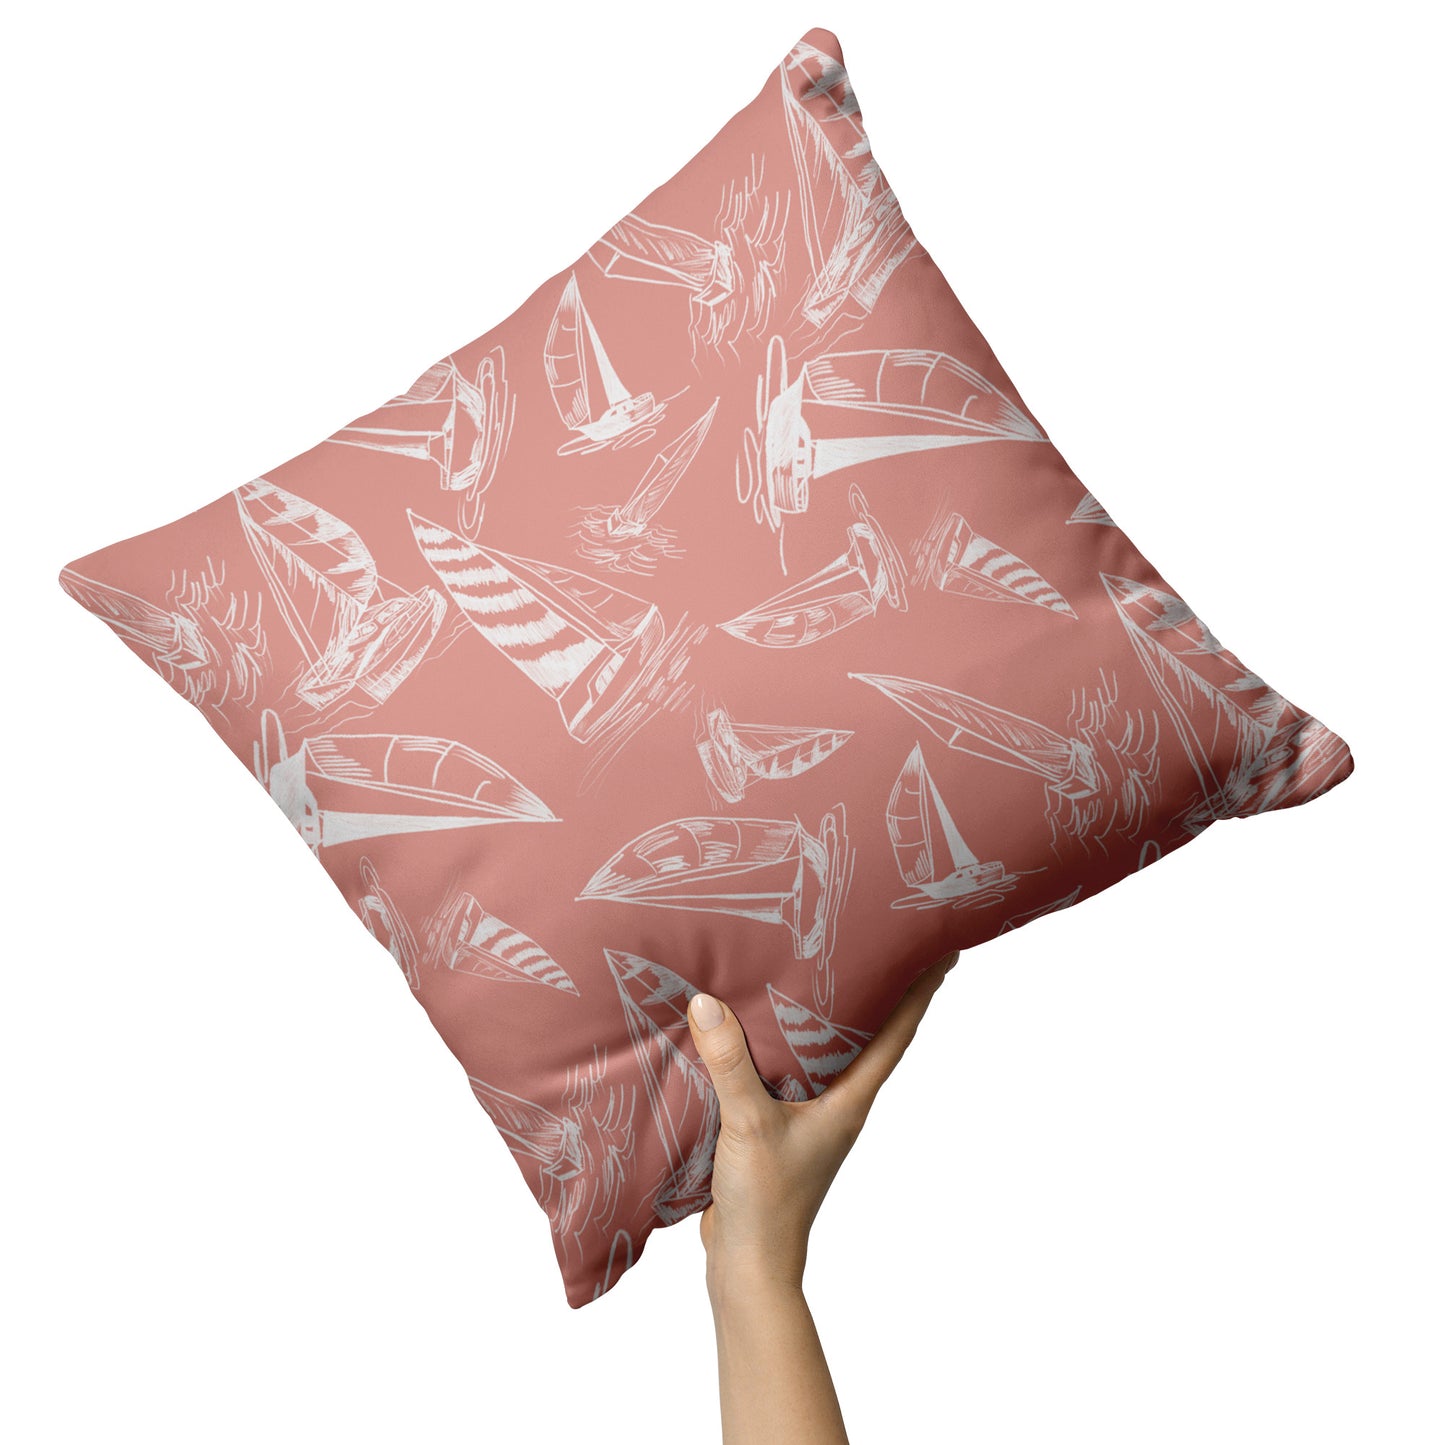 Sailboat Sketches on Coral, Throw Pillow